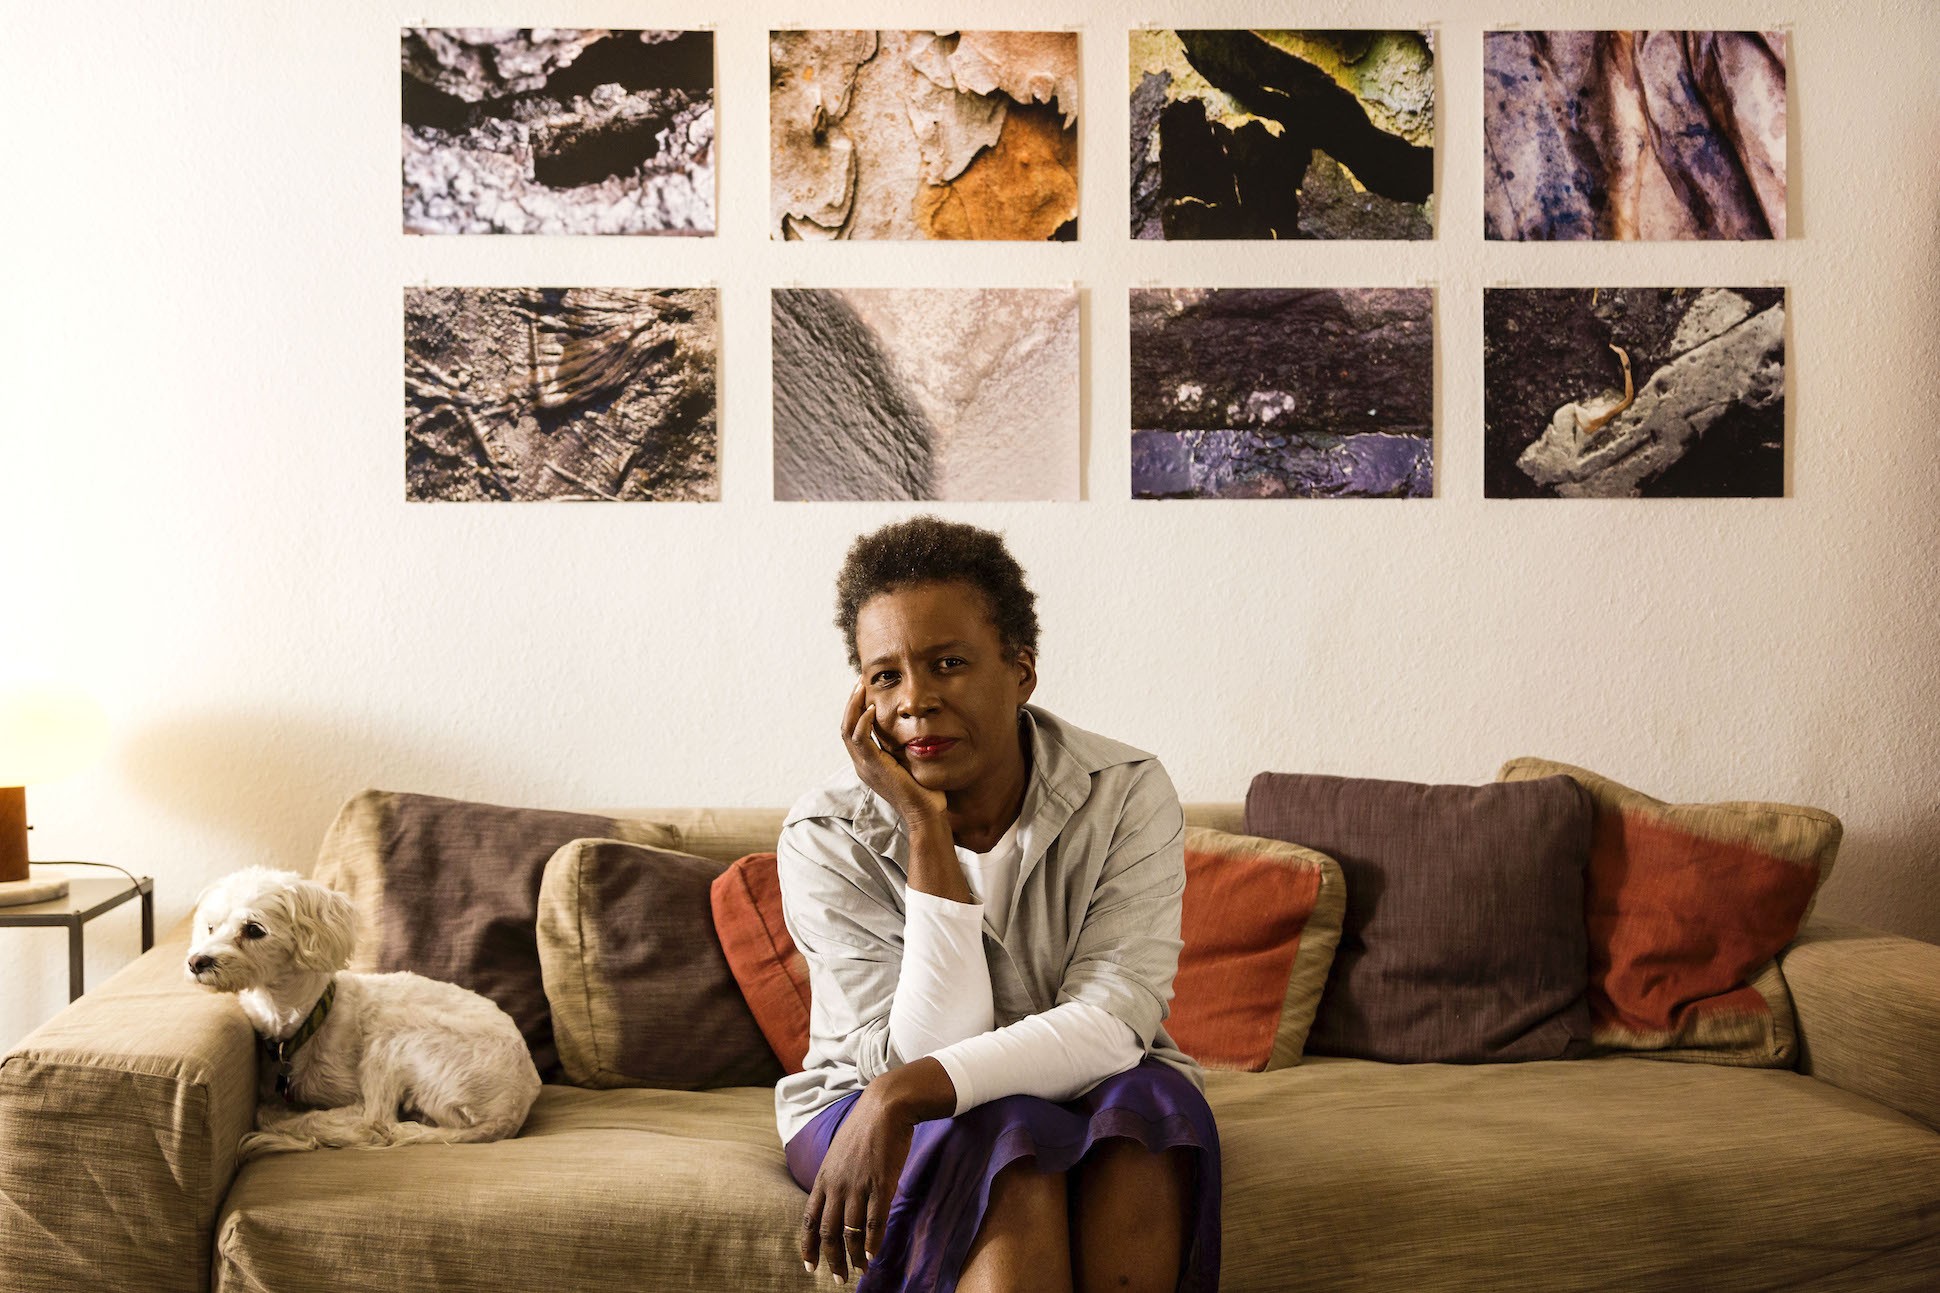 Claudia Rankine on Confronting Whiteness Head-On Through Language